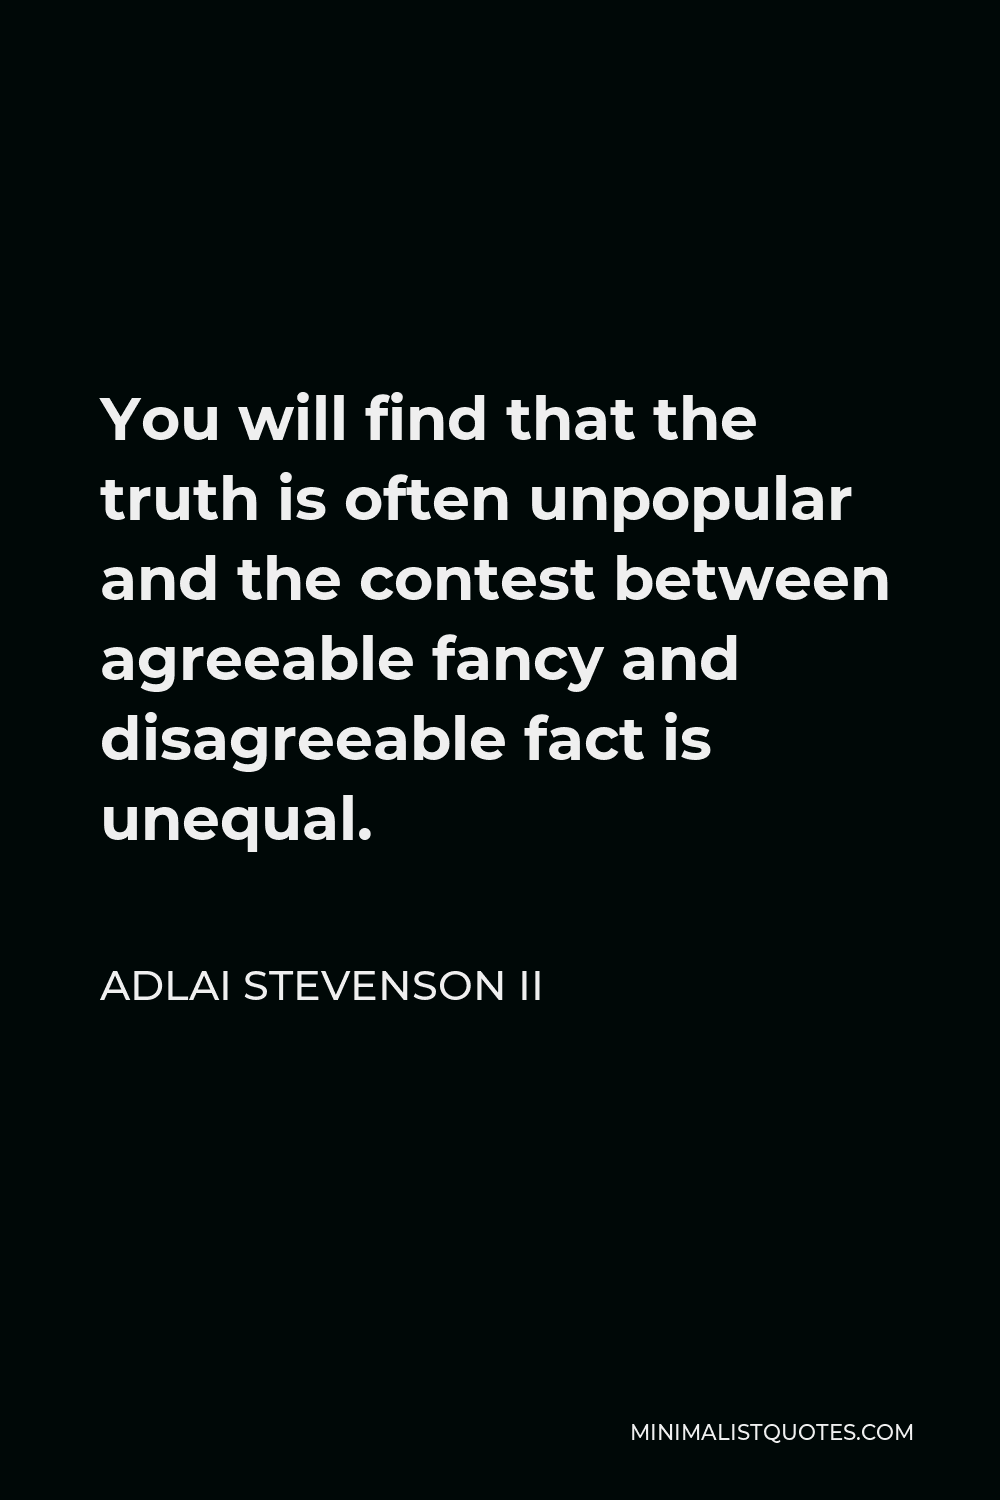 Adlai Stevenson II Quote - You will find that the truth is often unpopular and the contest between agreeable fancy and disagreeable fact is unequal.